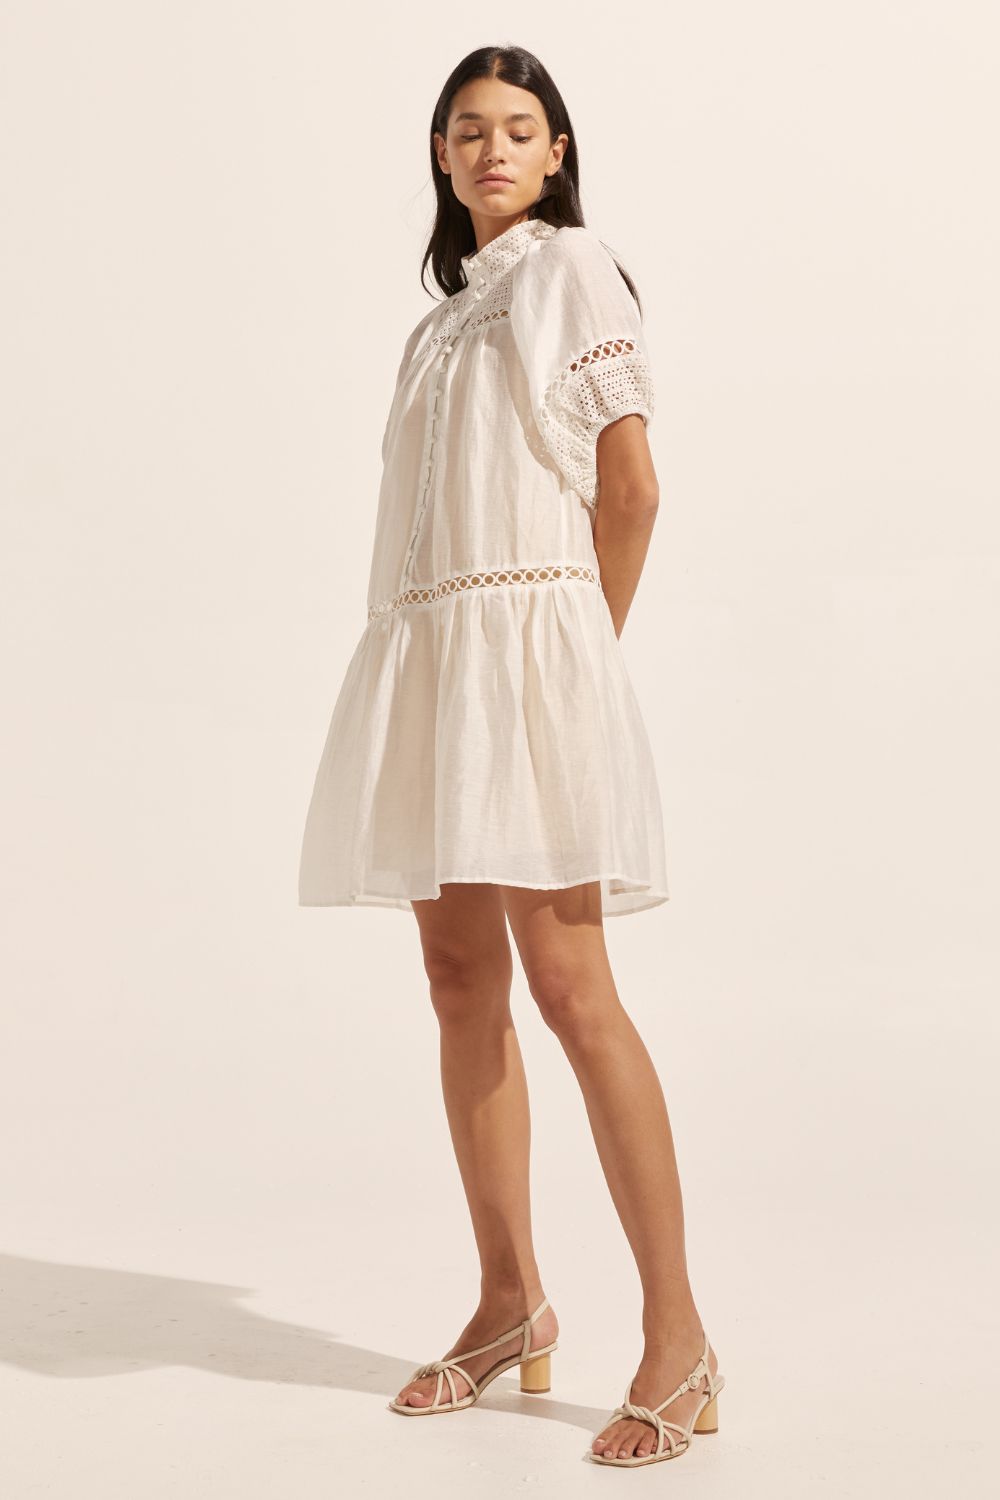 white, high neck, covered buttons, circular lace detailing, drop waist, mid-length sleeve, mini dress, side image